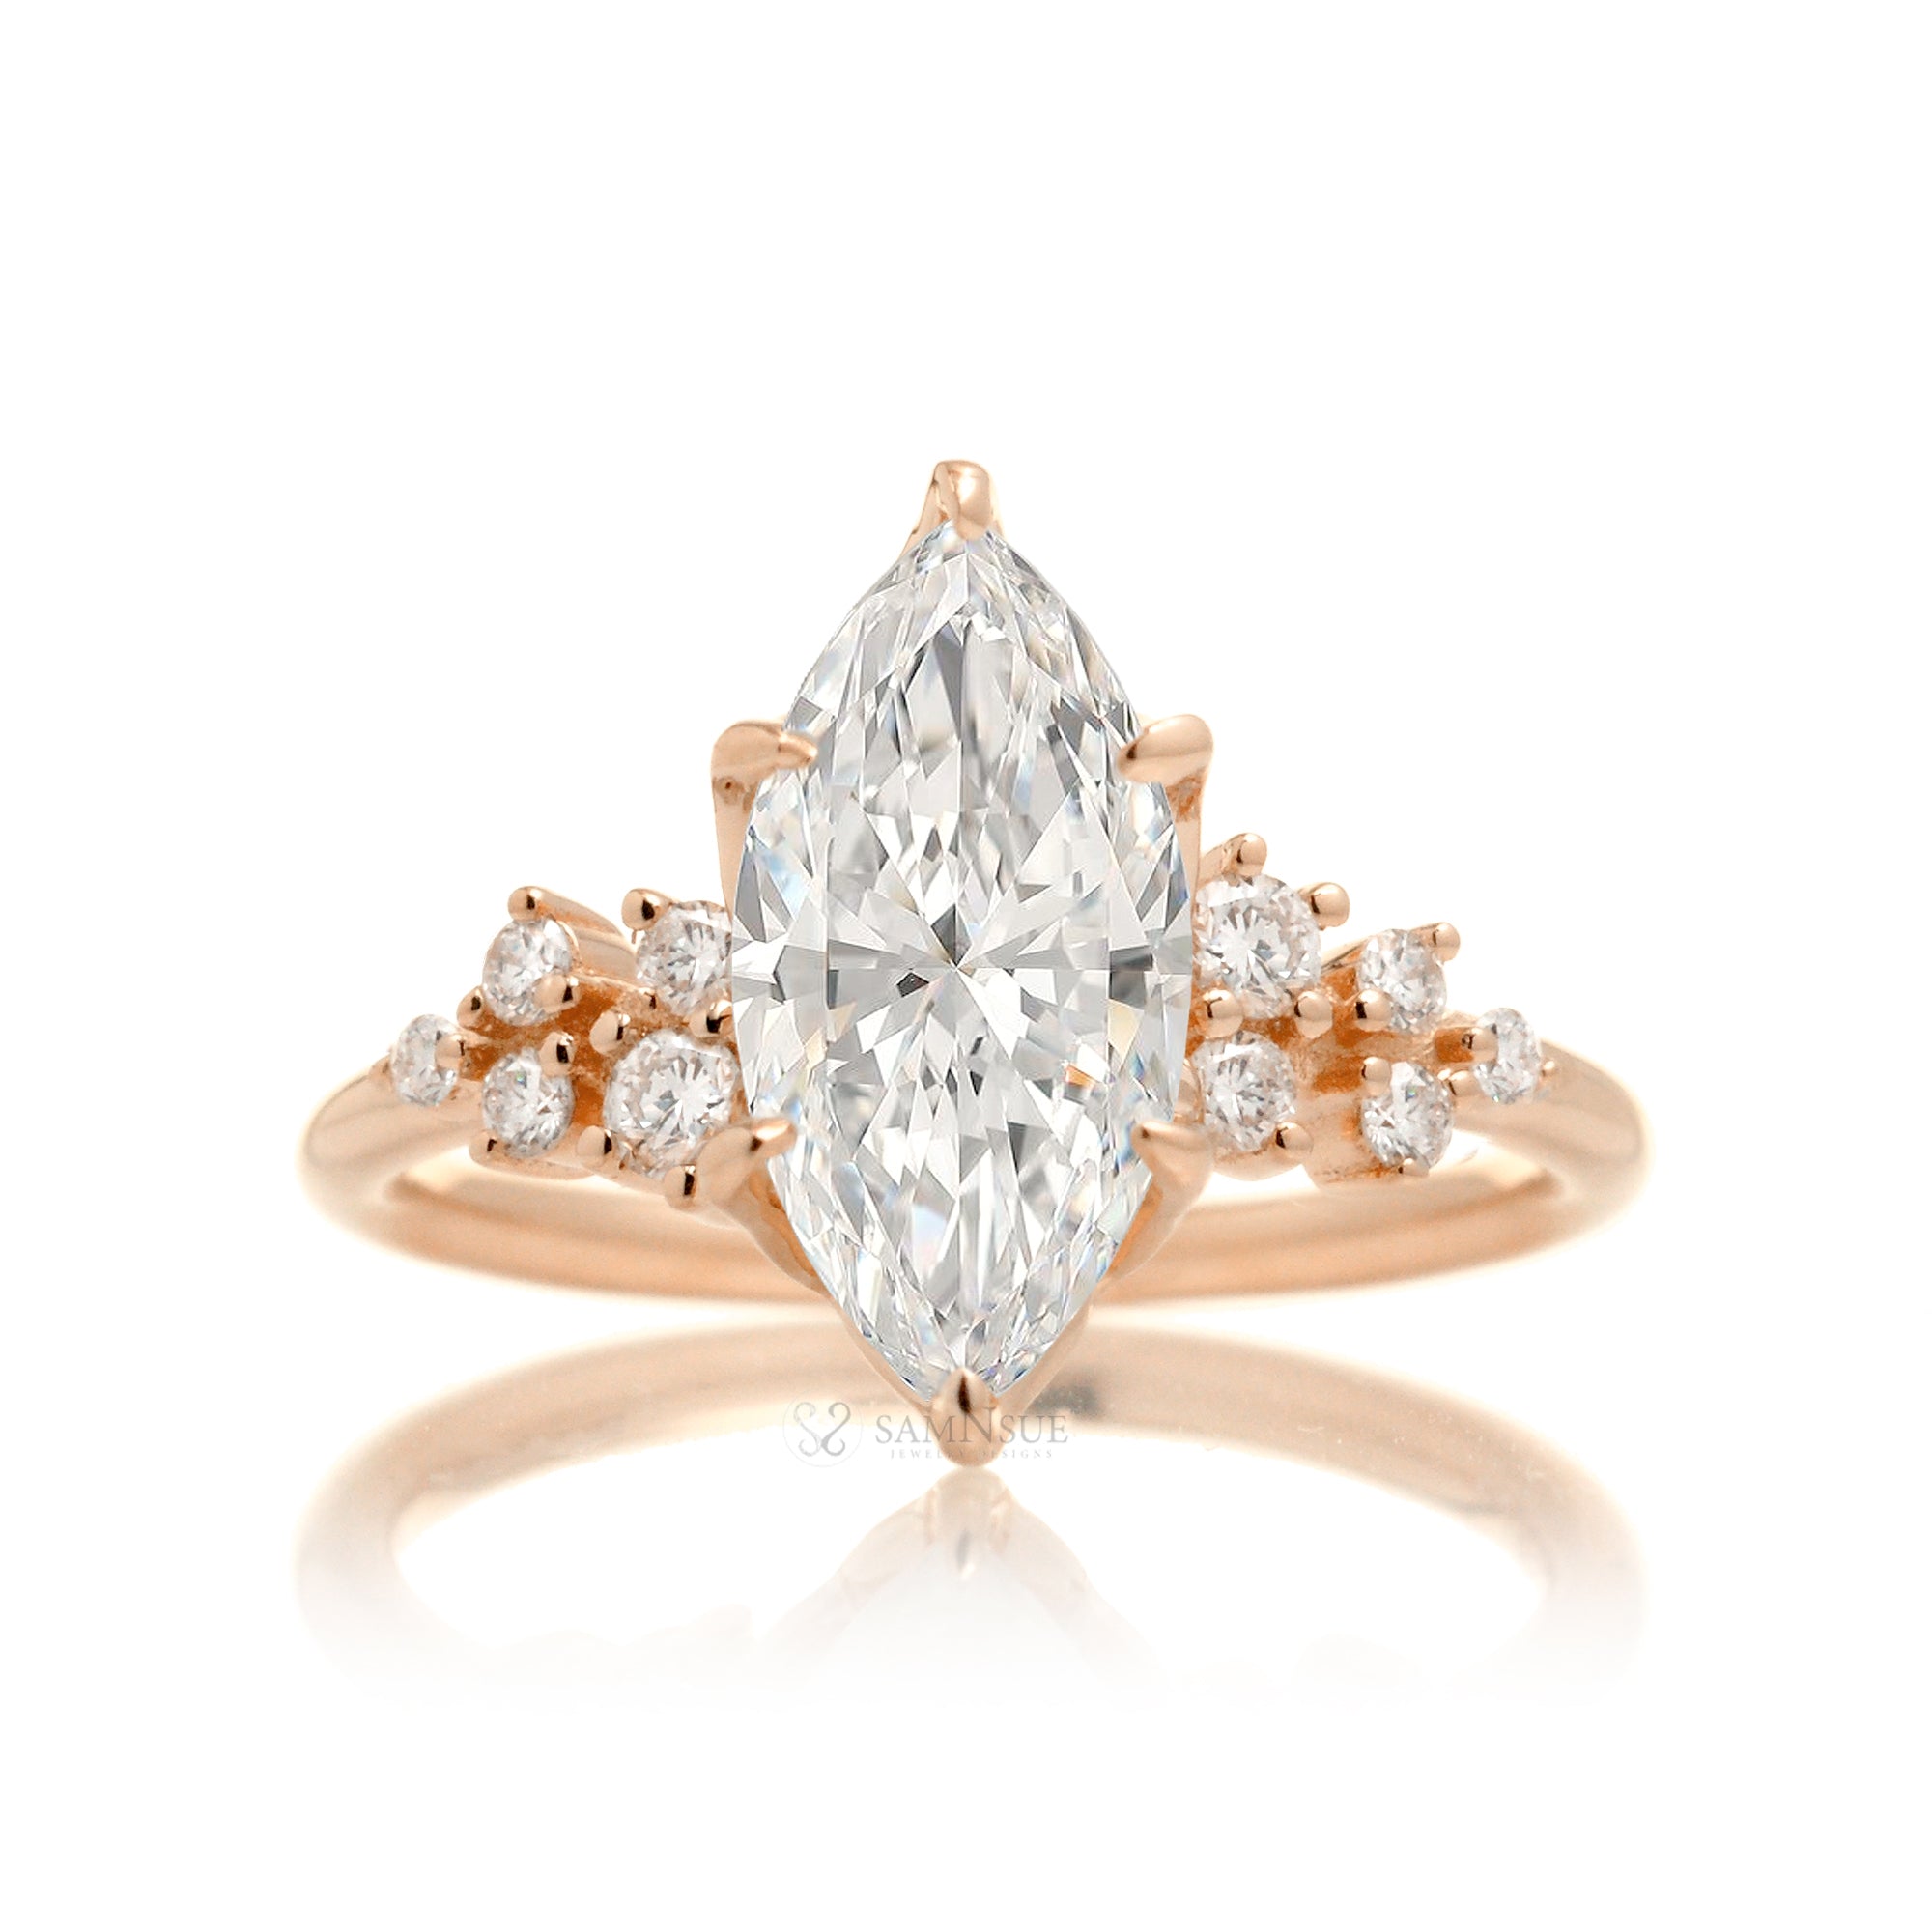 Marquise cut diamond solitaire with accent side constellation diamond in rose gold